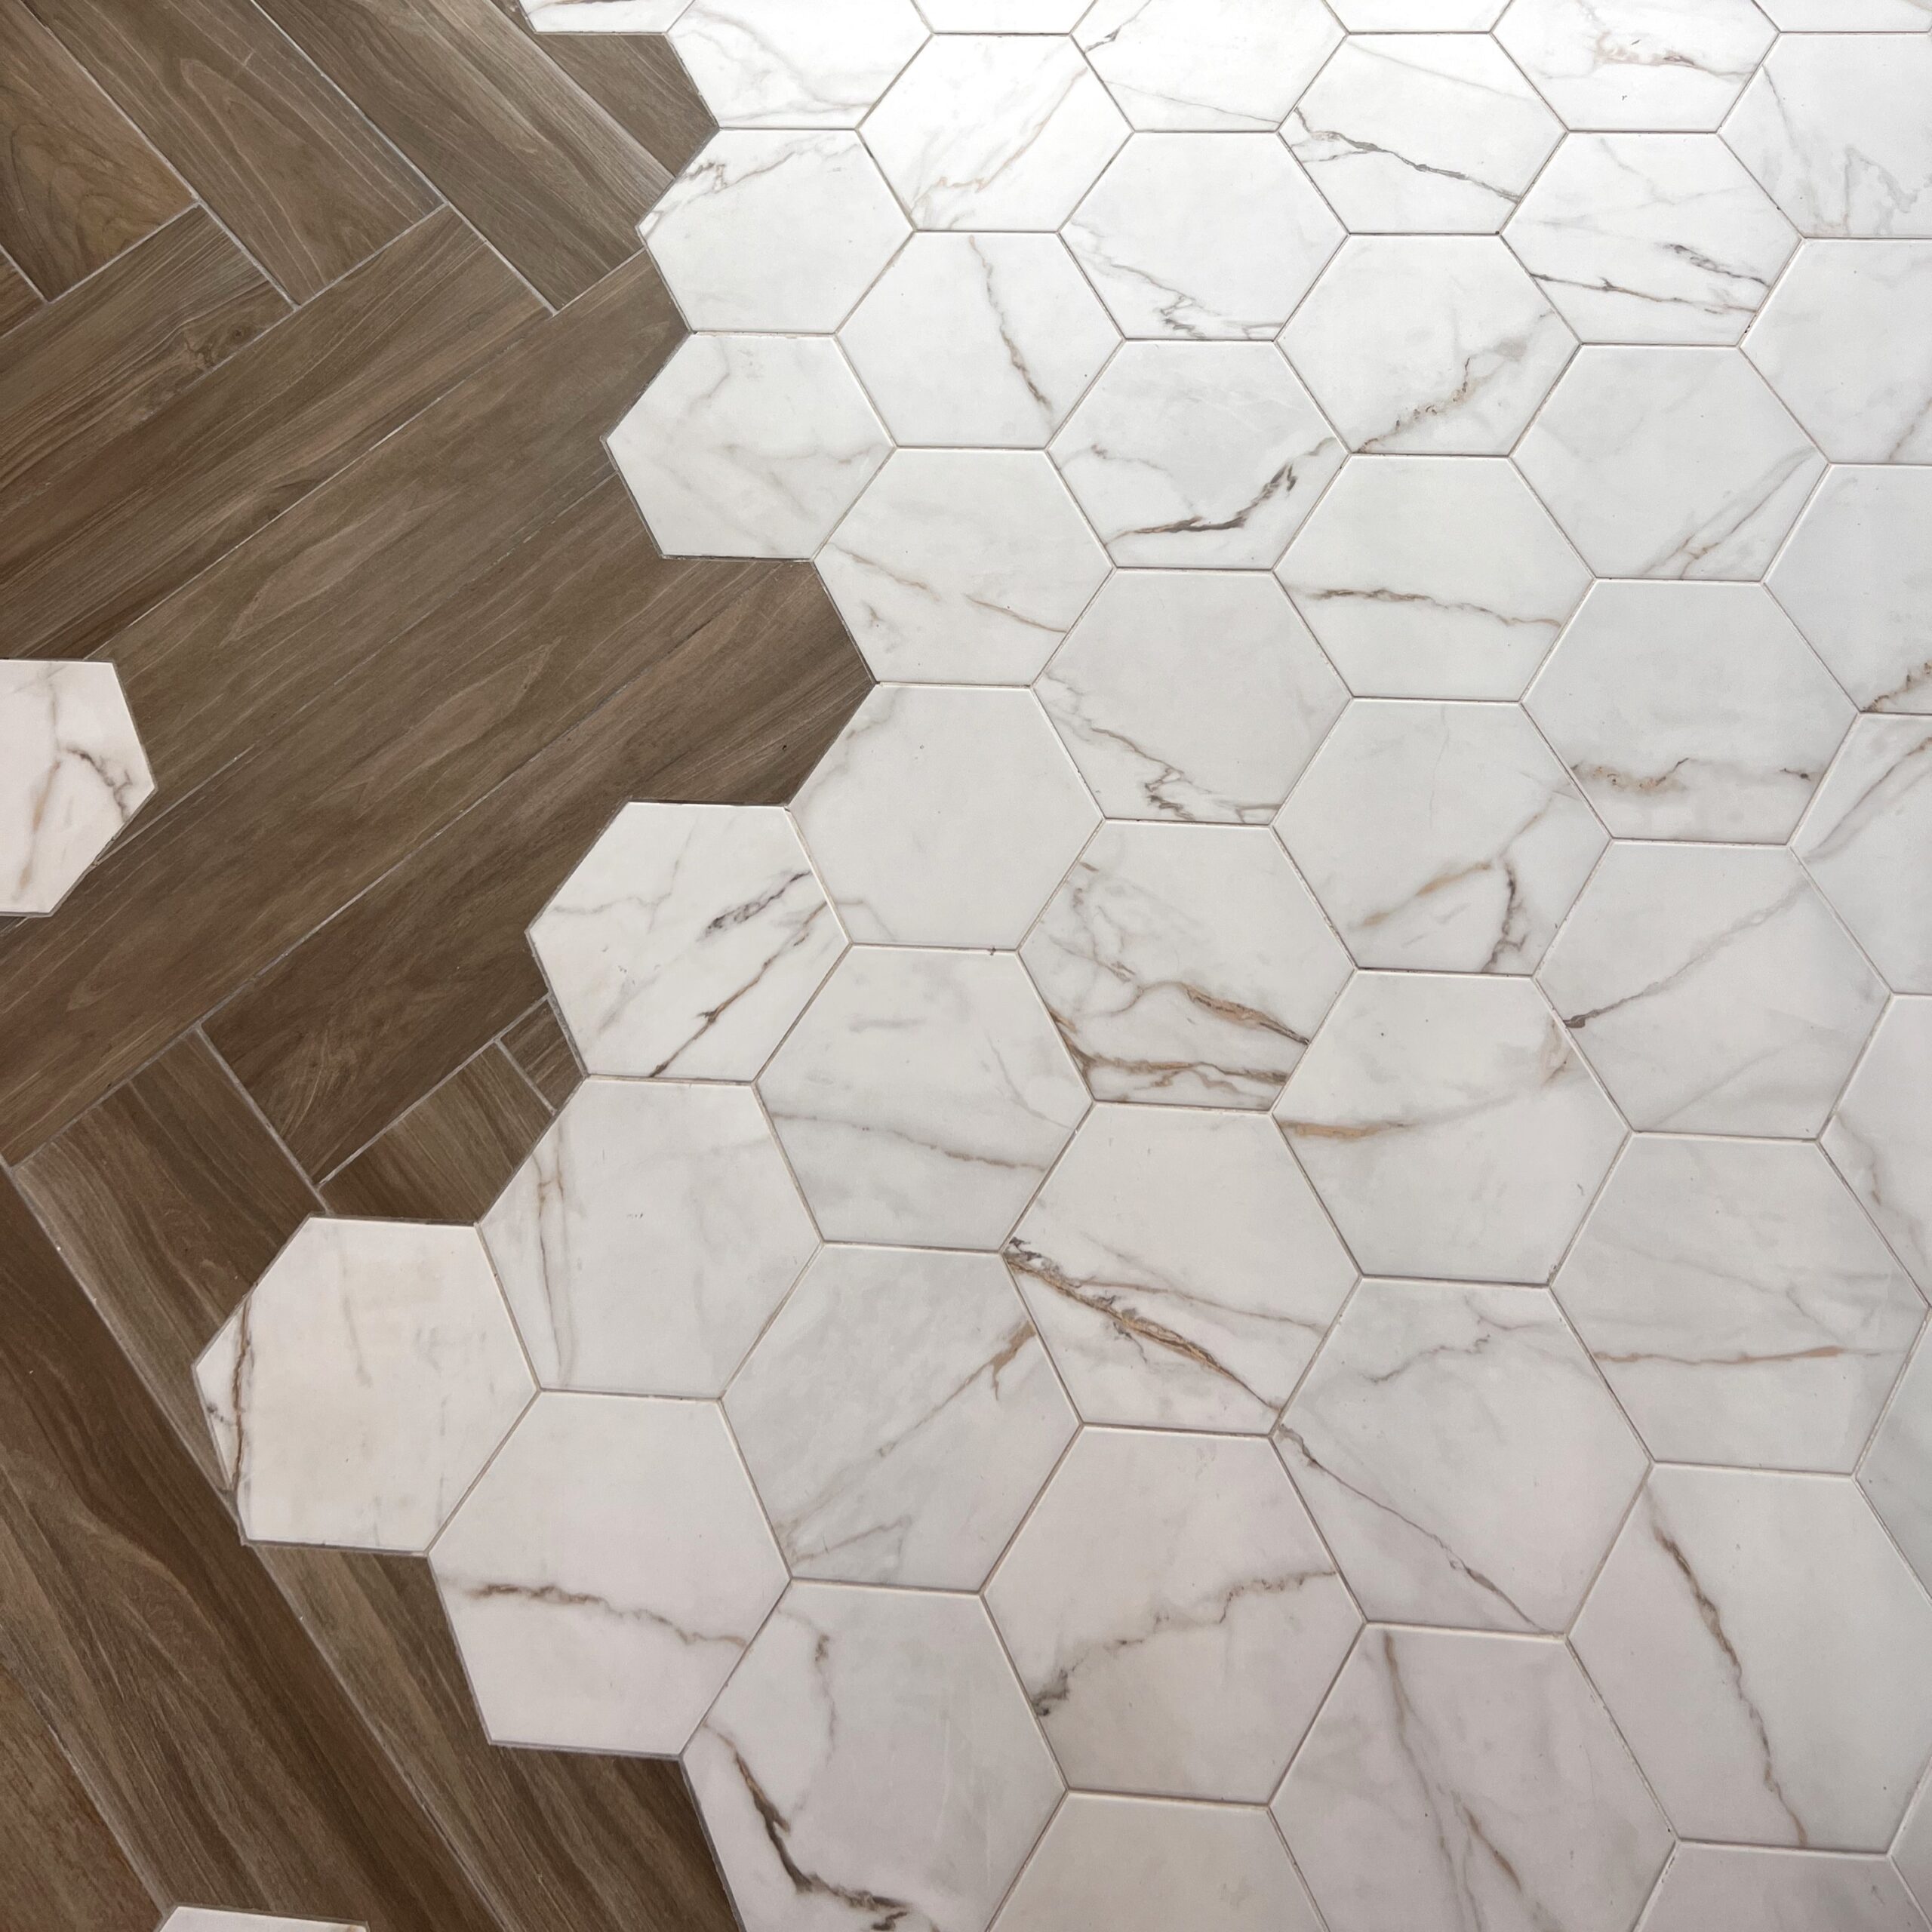 Wood look flooring tile transition to hexagon tile